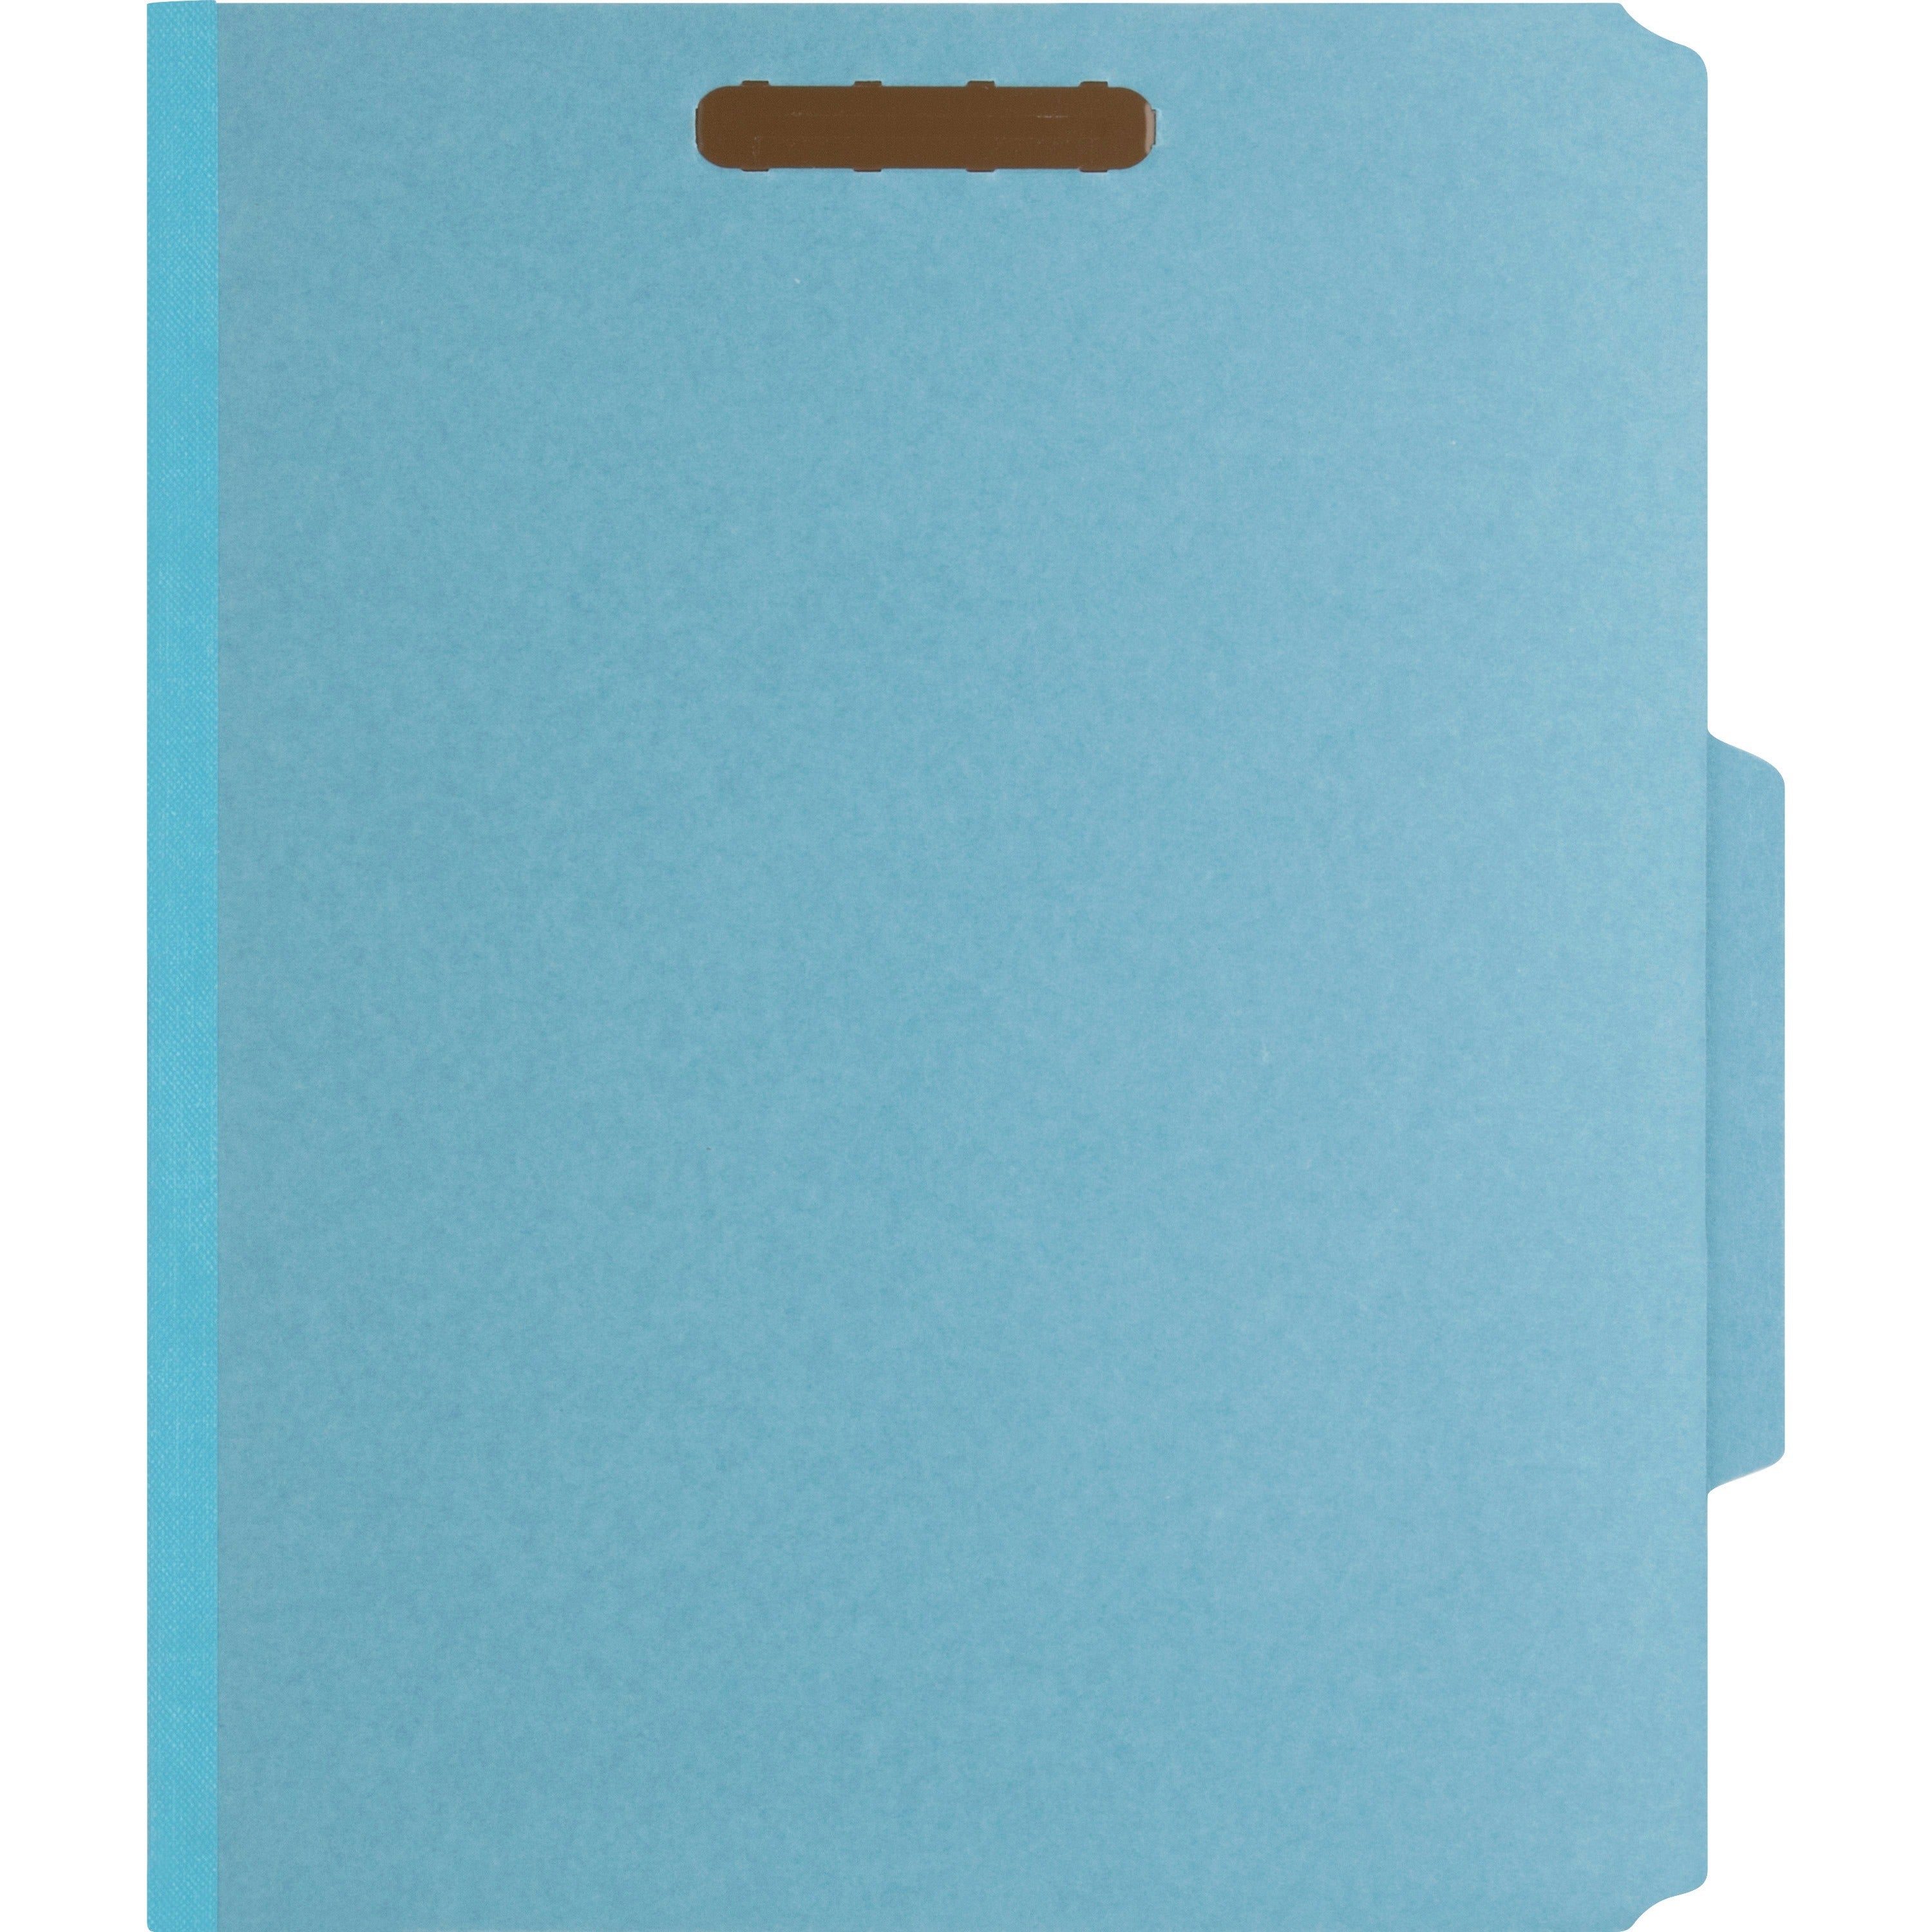 Nature Saver 1/3 Tab Cut Letter Recycled Classification Folder - 8 1/2" x 11" - 2" Fastener Capacity for Folder - Top Tab Location - 1 Divider(s) - Blue - 100% Recycled - 10 / Box - 